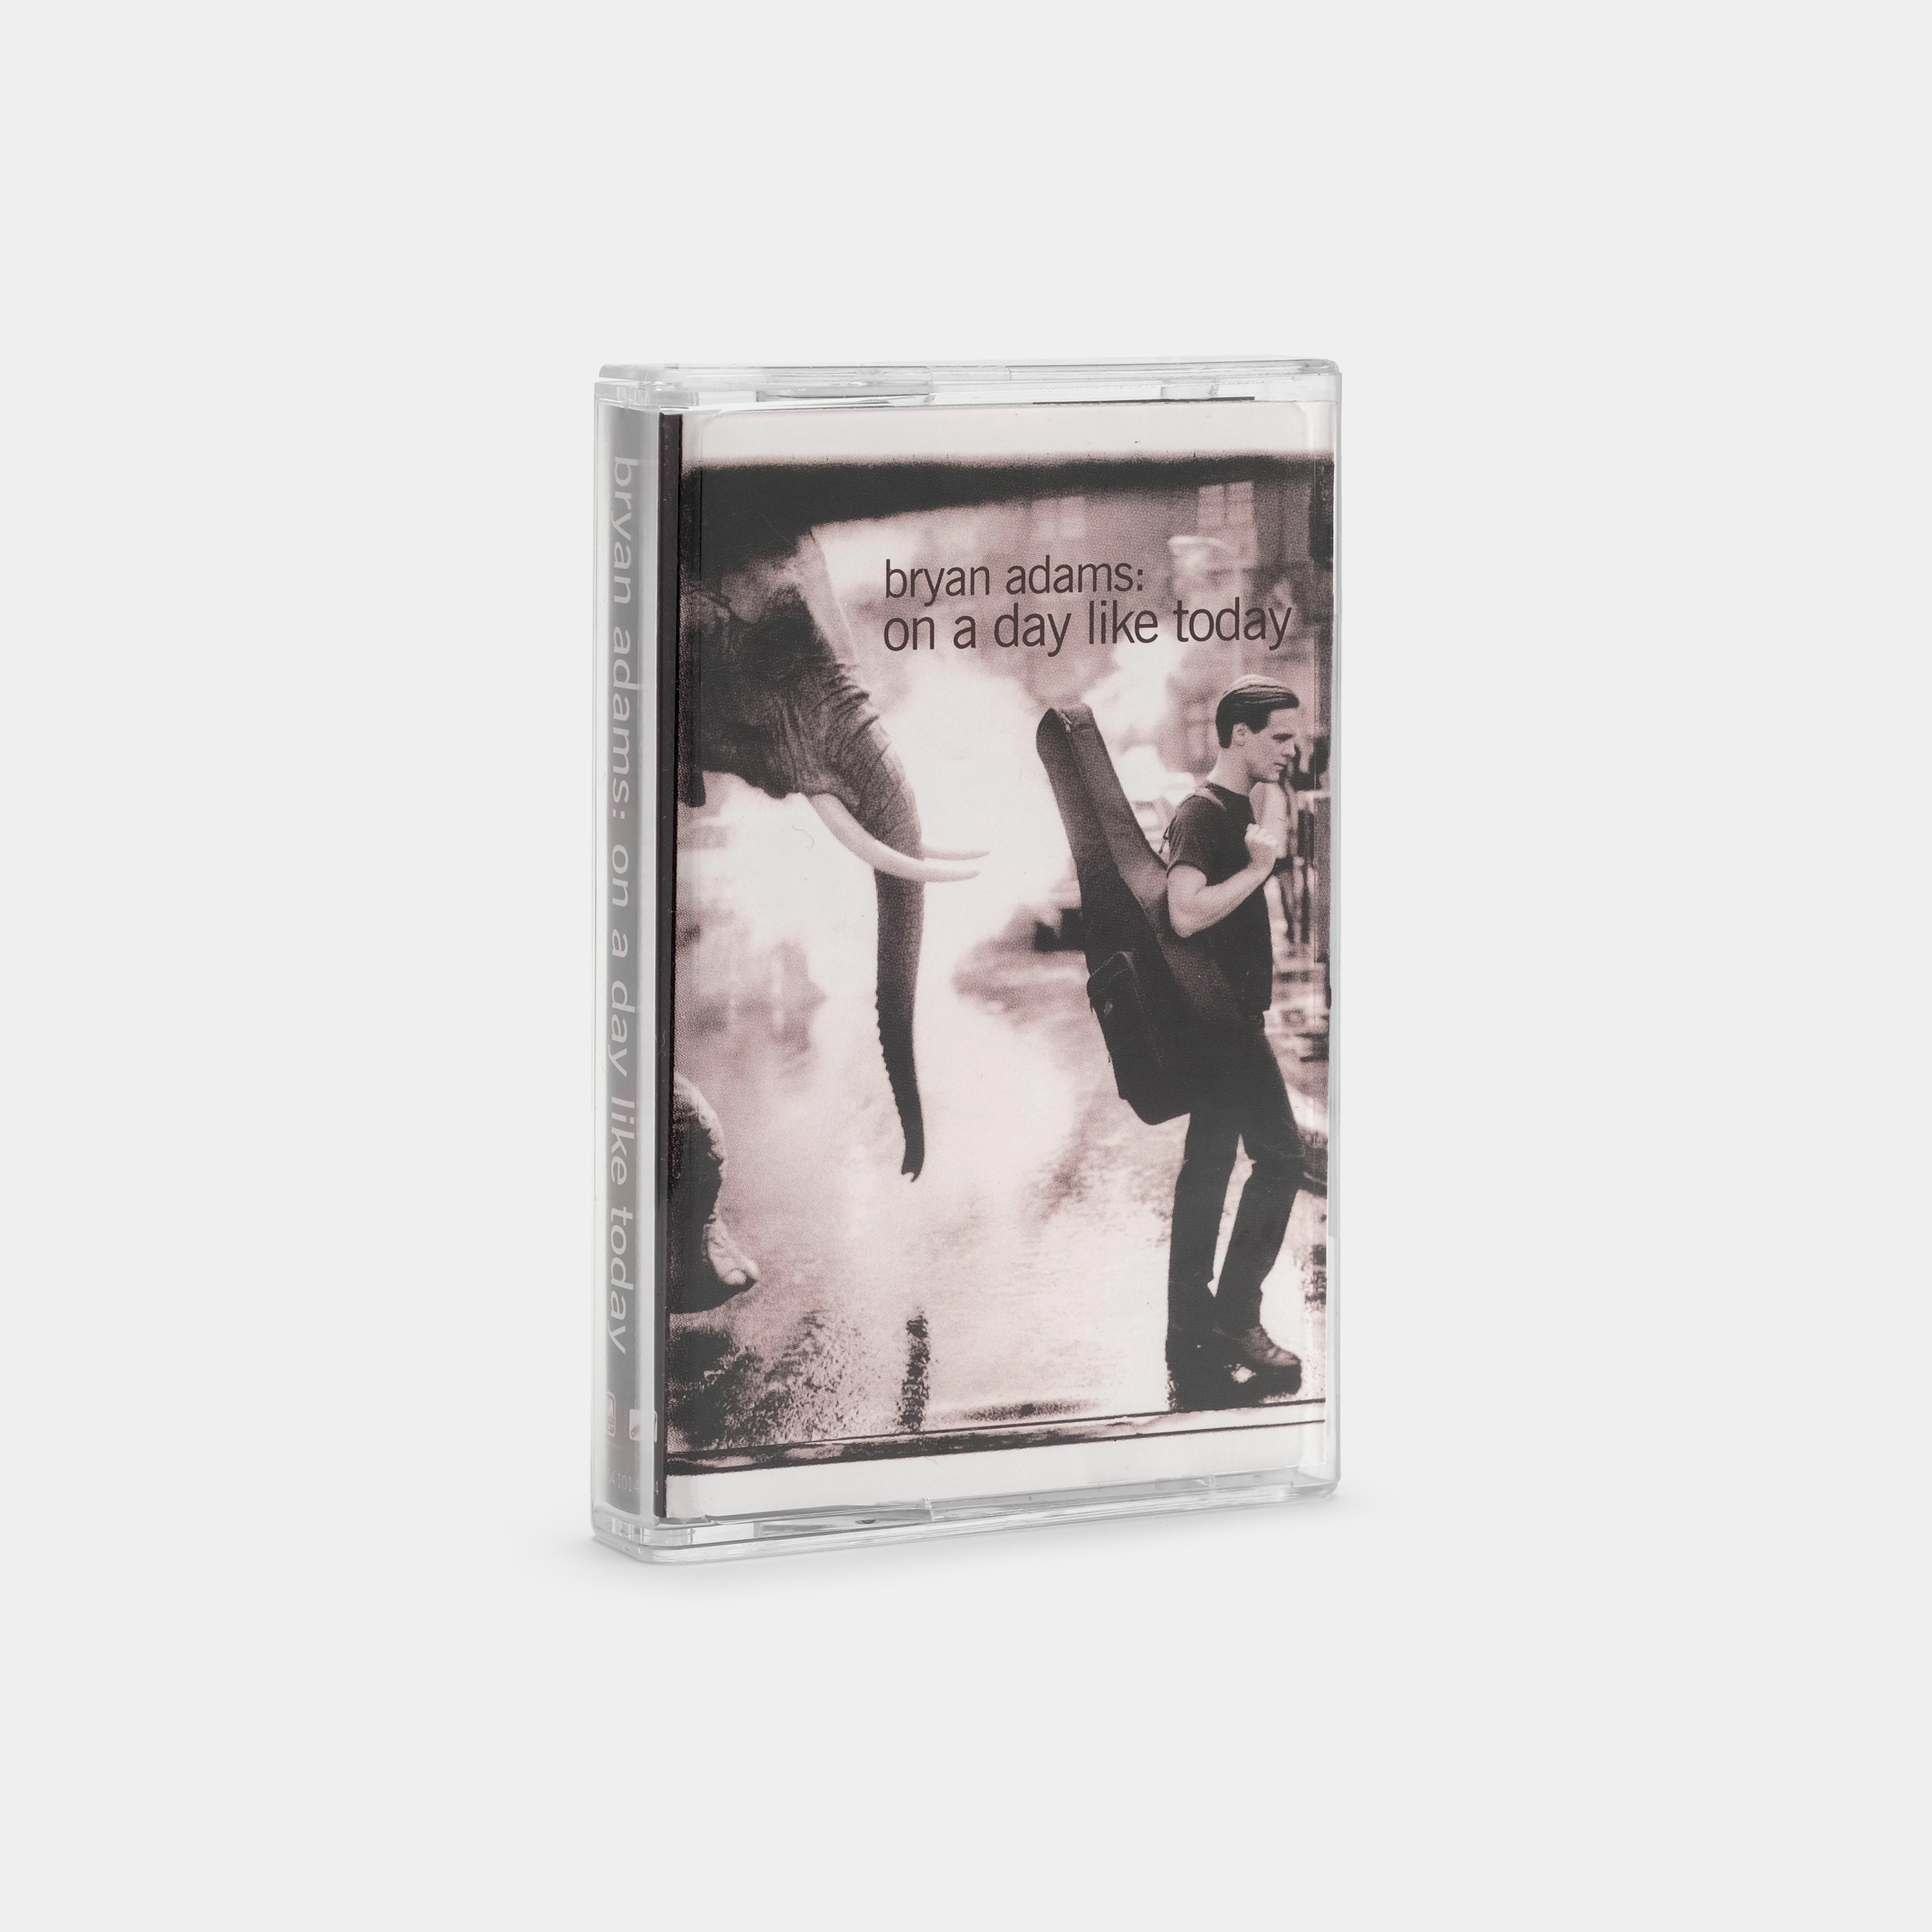 Bryan Adams - On A Day Like Today Cassette Tape